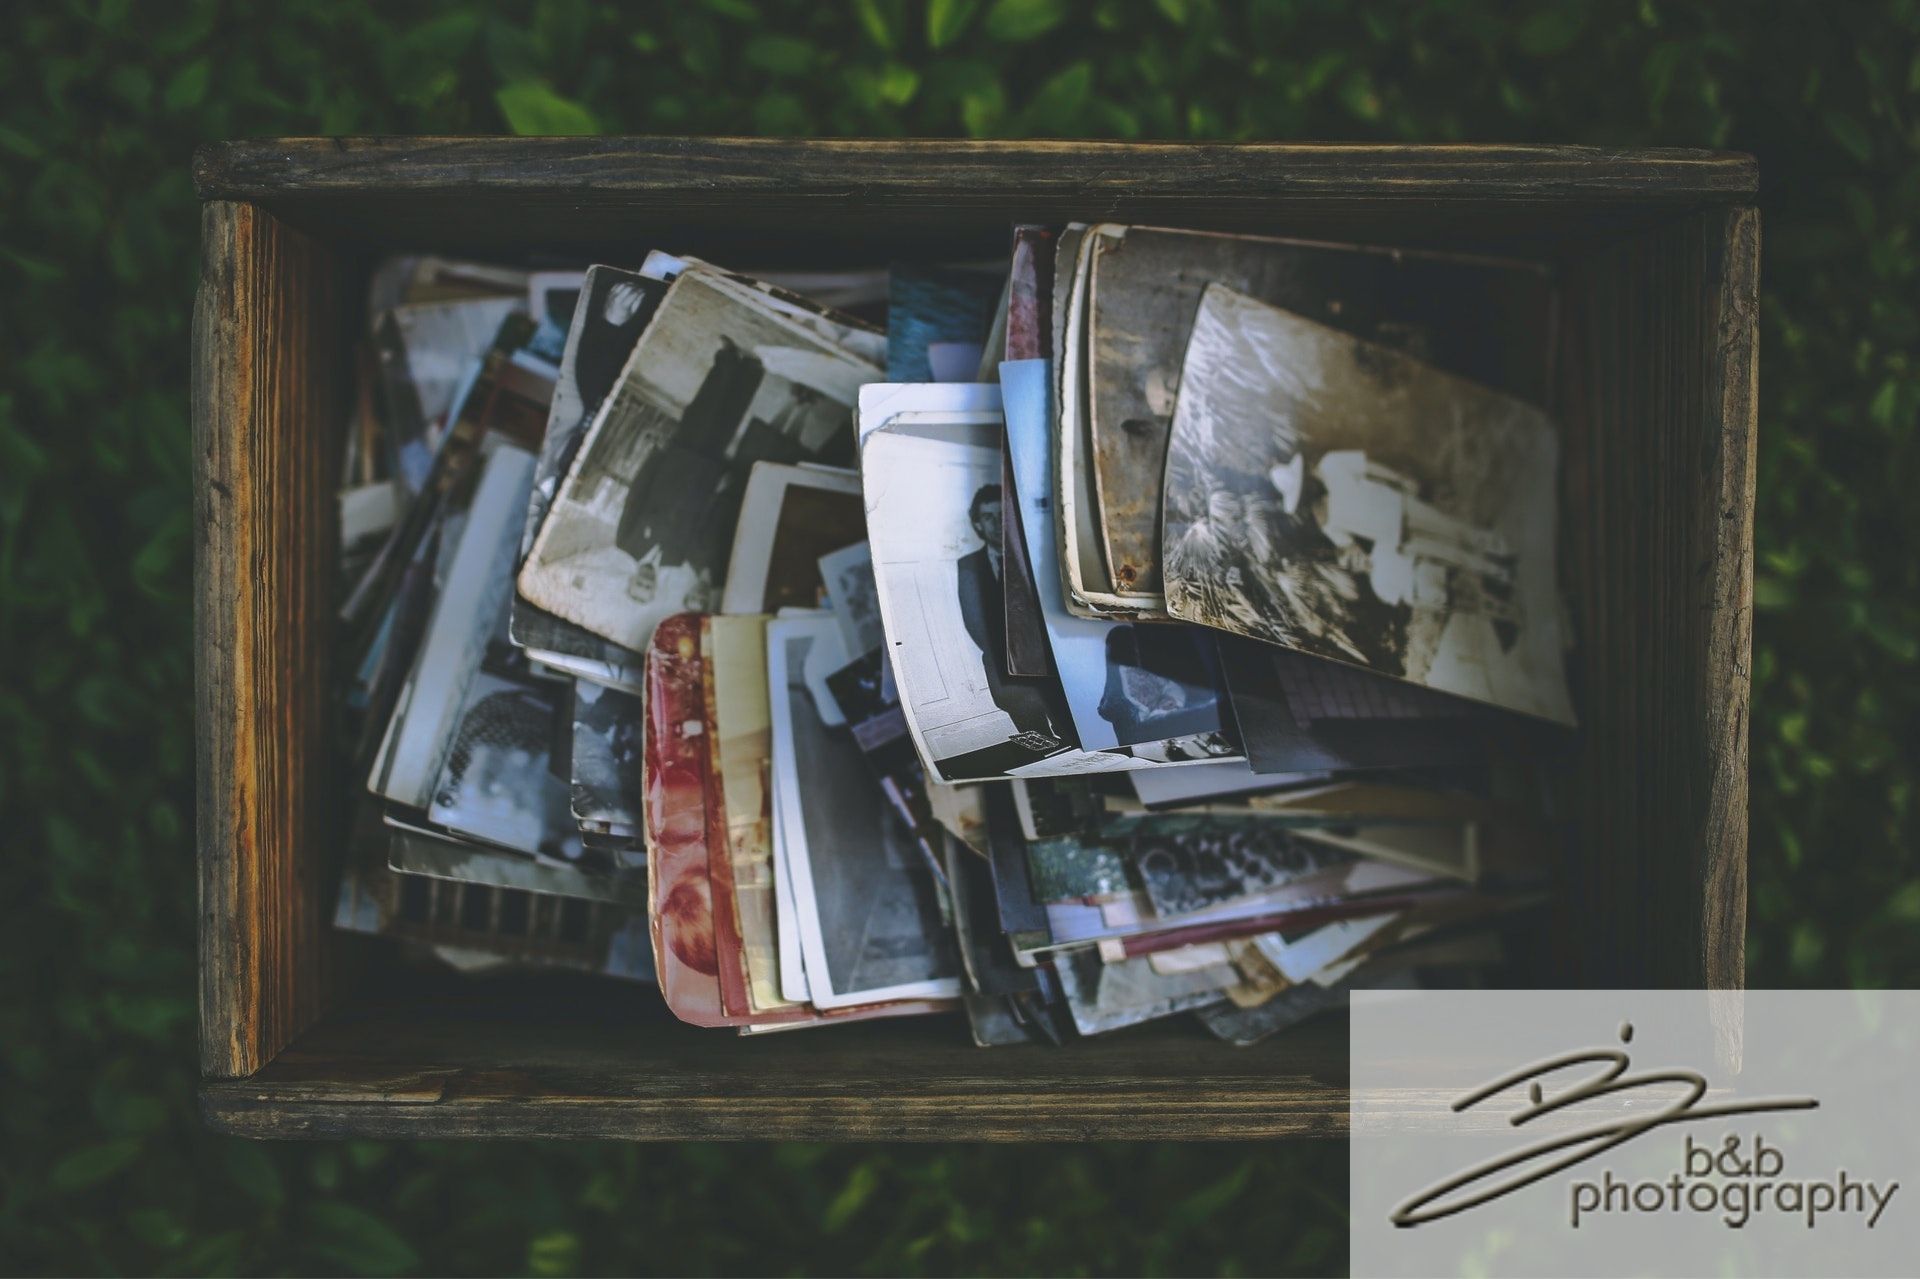 A stack of old photos in a wooden crate against a green background